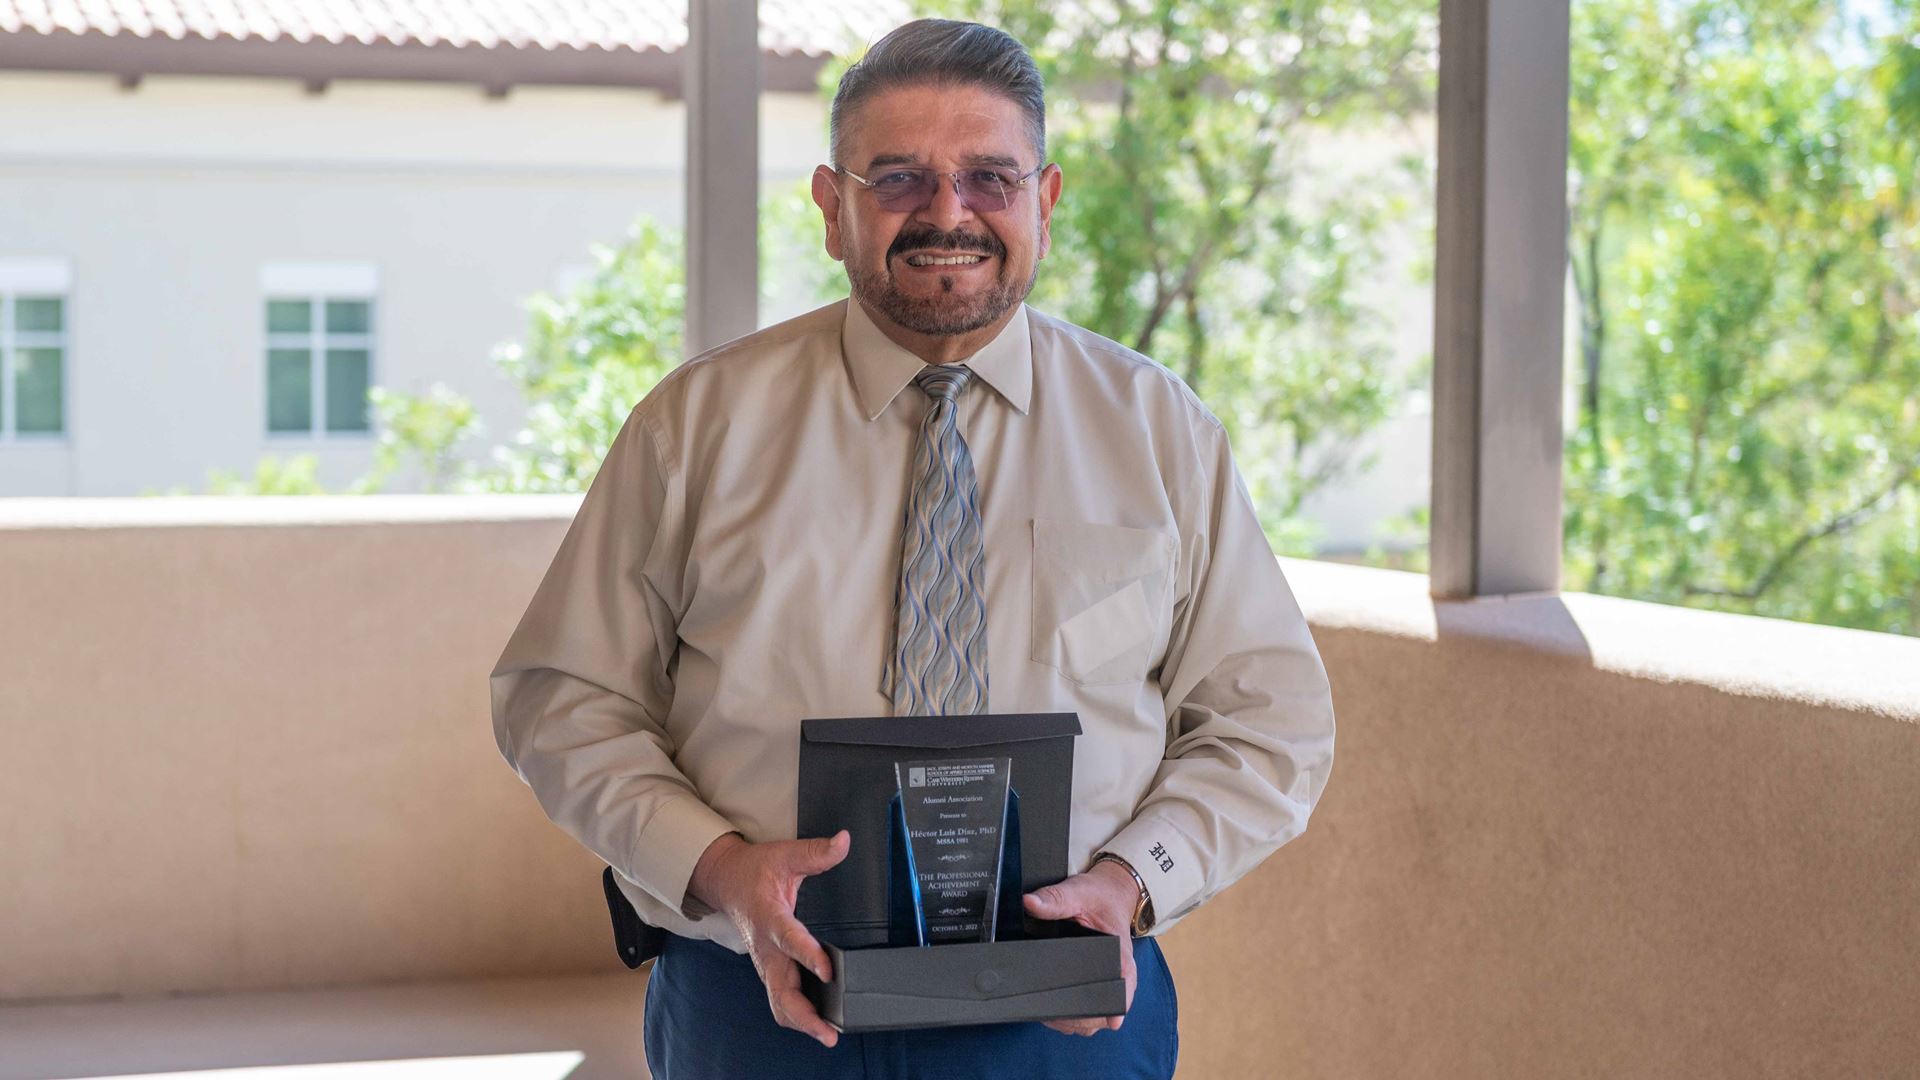 NMSU School of Social Work director recognized by alma mater